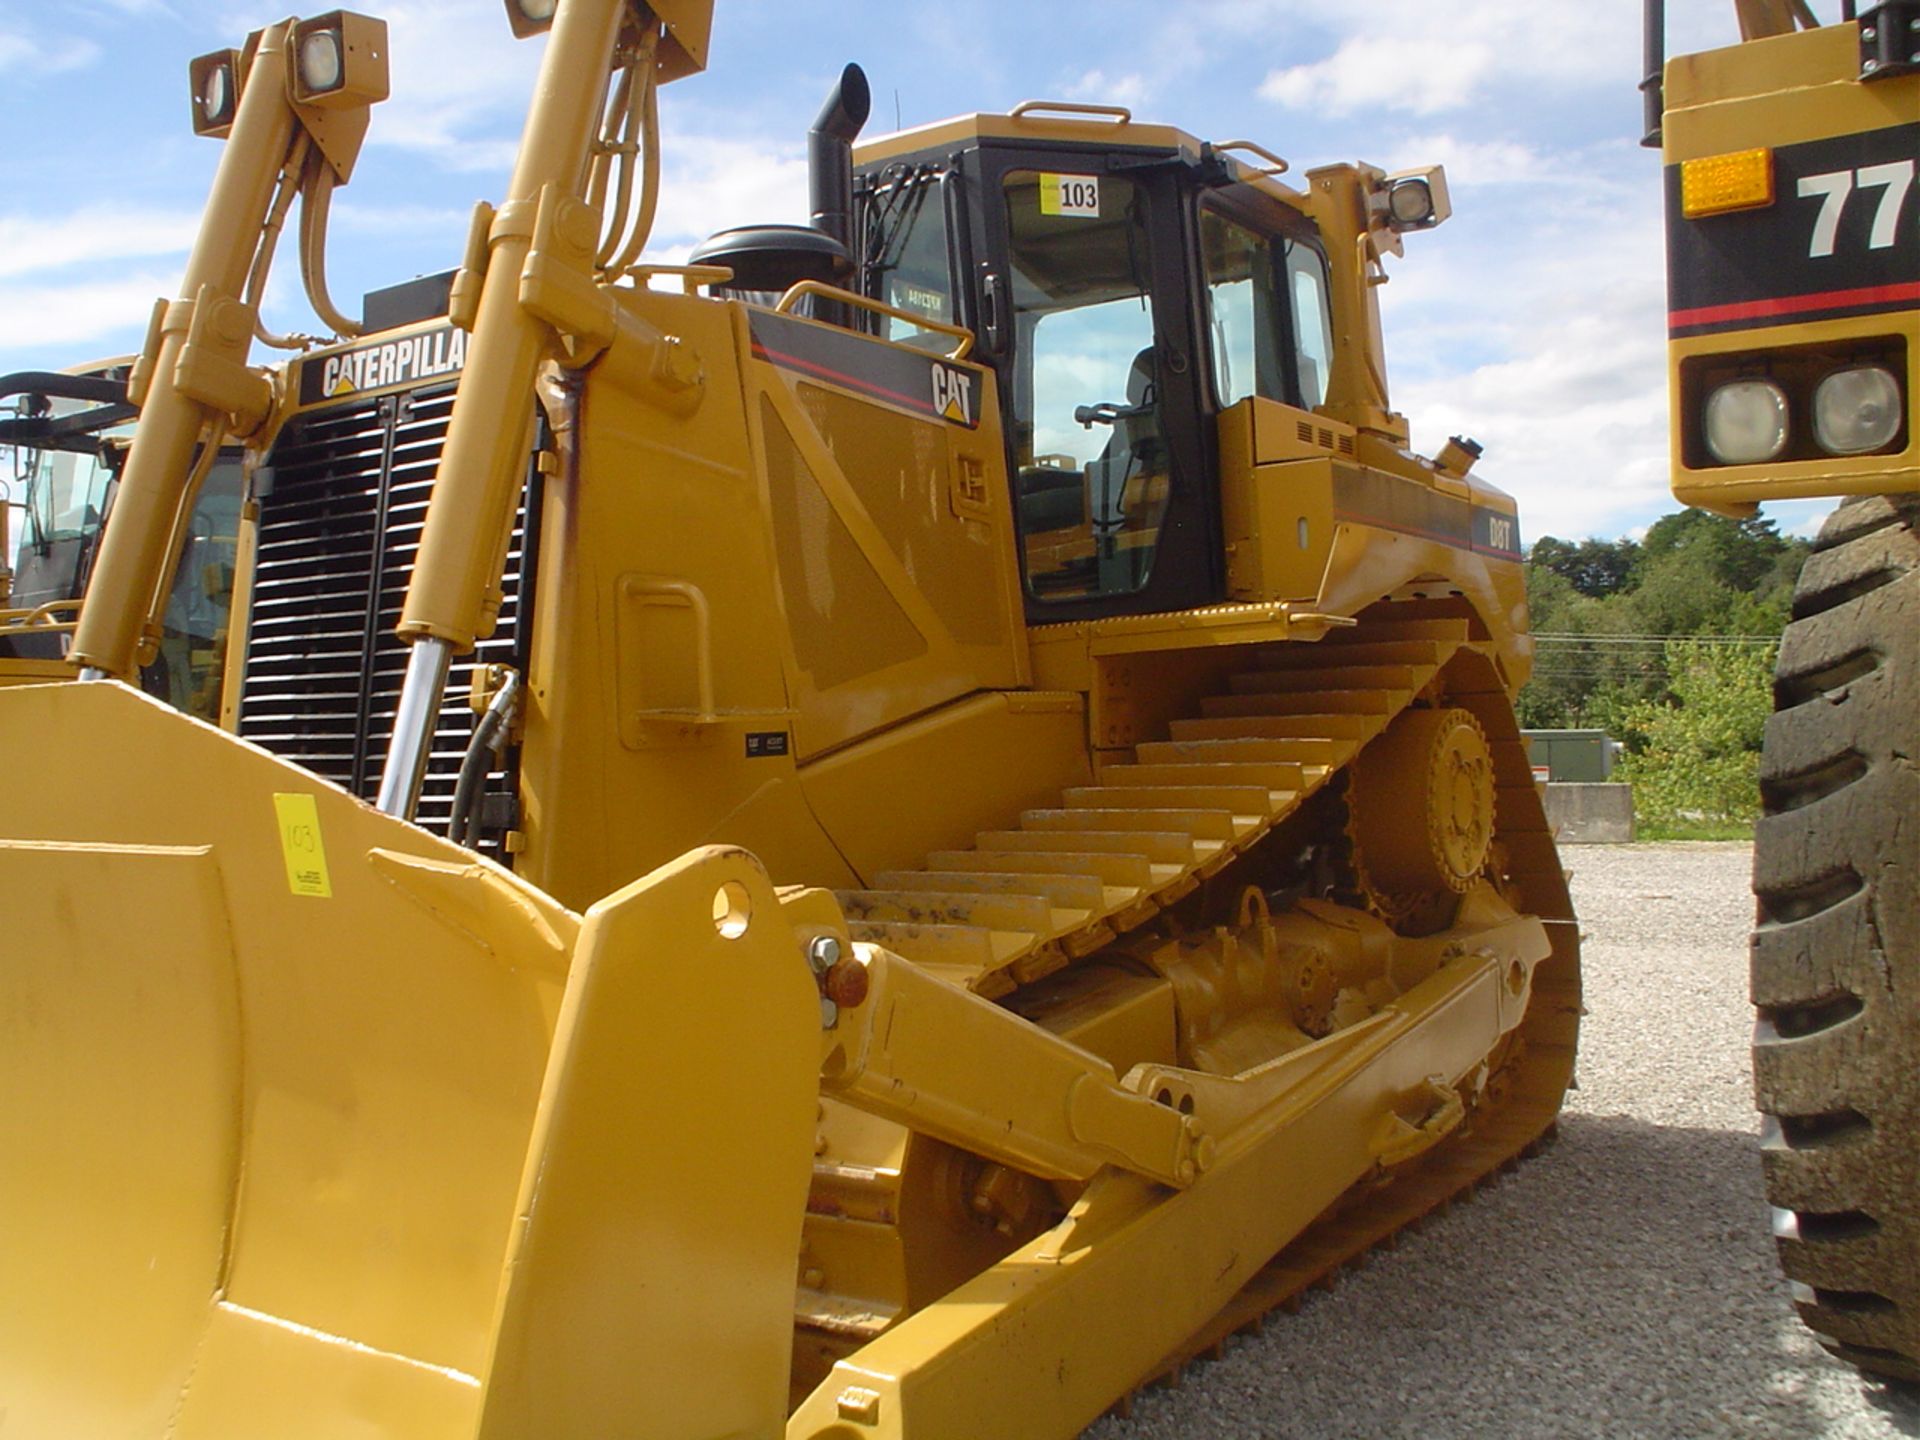 2009 CATERPILLAR D8T CRAWLER TRACTOR, ENCLOSED CAB, 24'' WIDE PADS, 12-1/2' U-SHAPED BLADE, NEW - Image 2 of 4